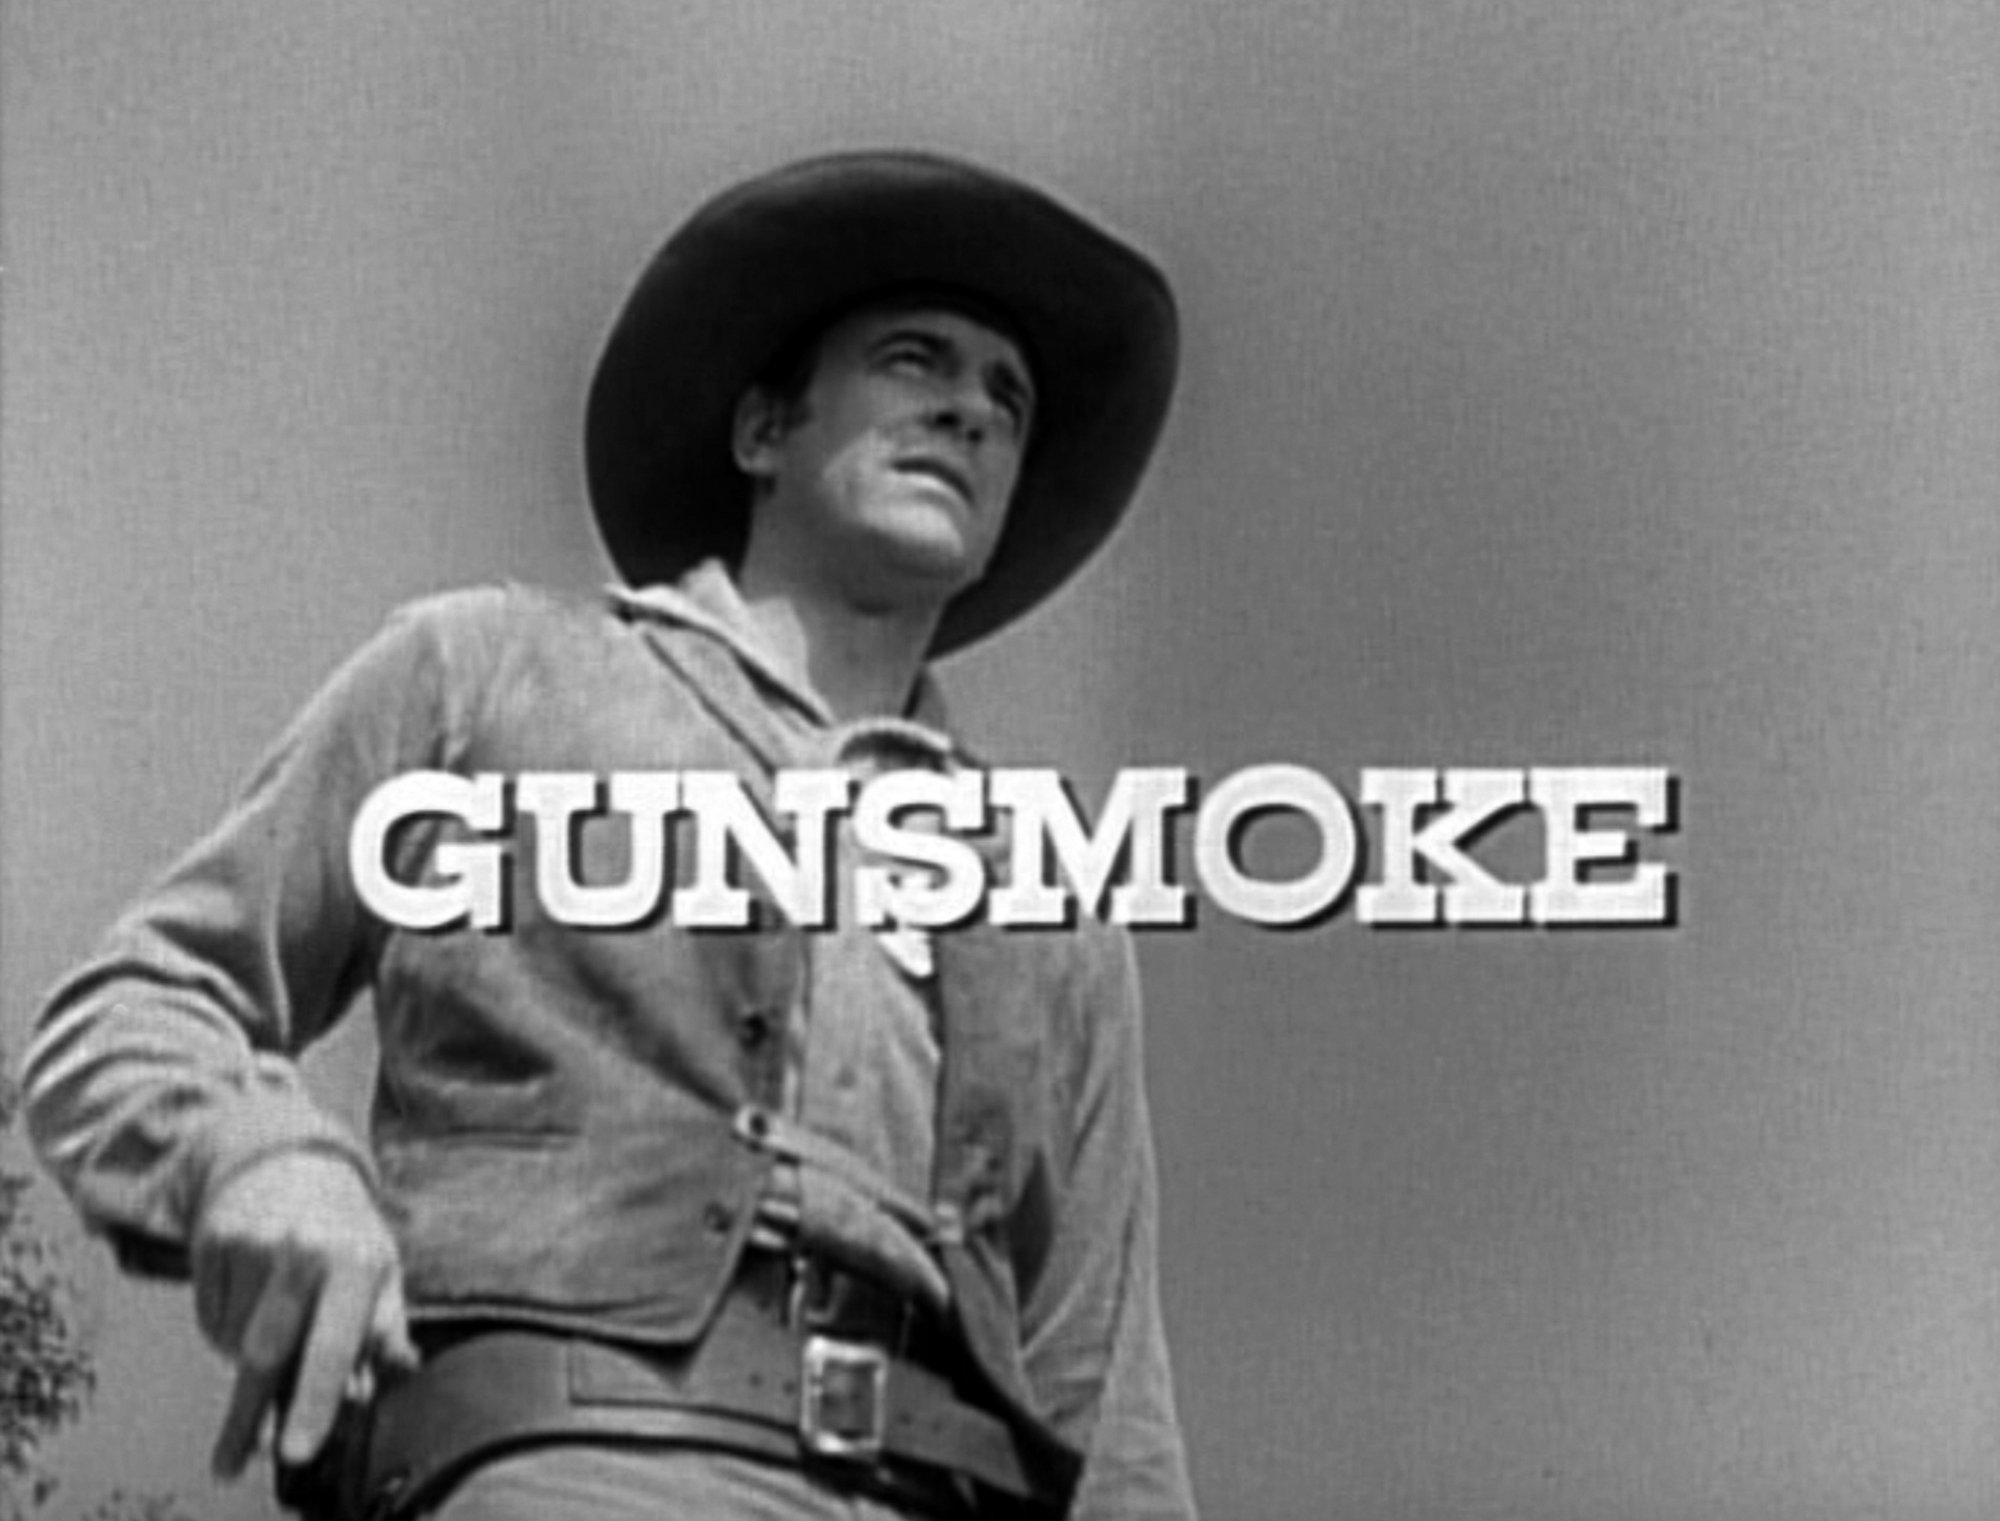 'Gunsmoke' episodes James Arness as Marshal Matt Dillon. He's wearing a Western costume with his hand on his gun in the holster with the show title over the image.